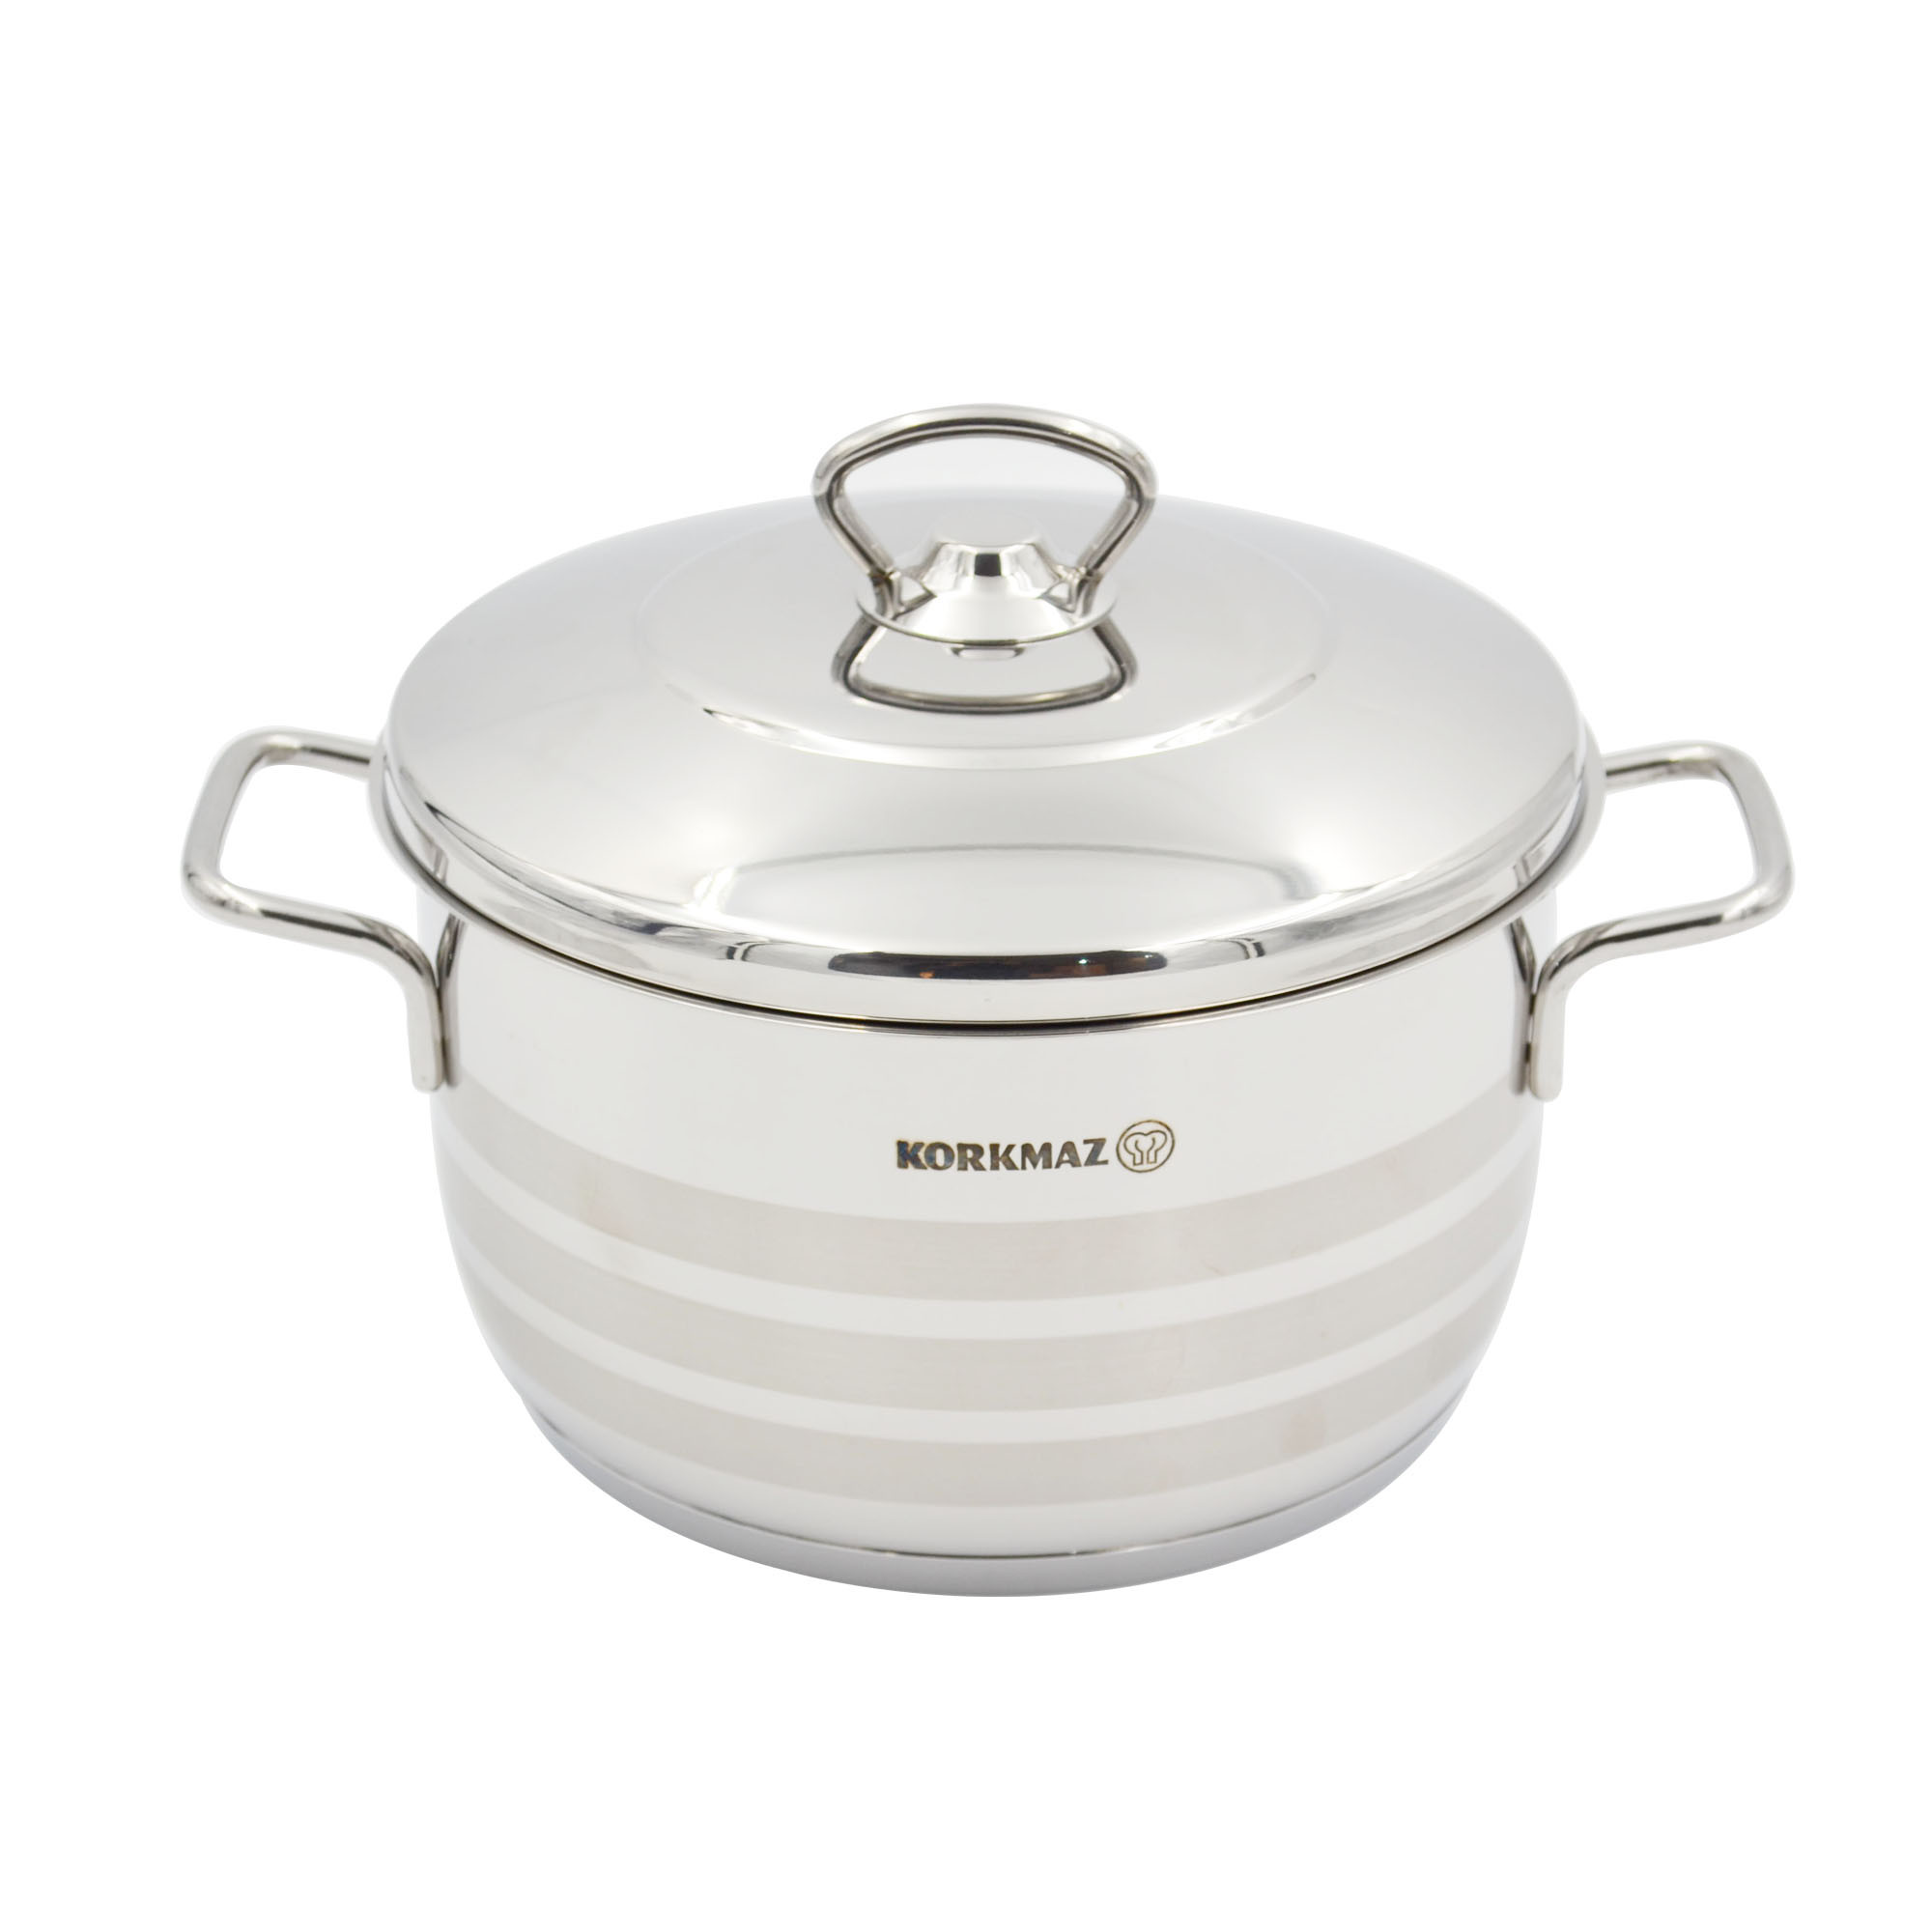  Astra Stainless steel Casserole 22x12 cm / 4.5 l.